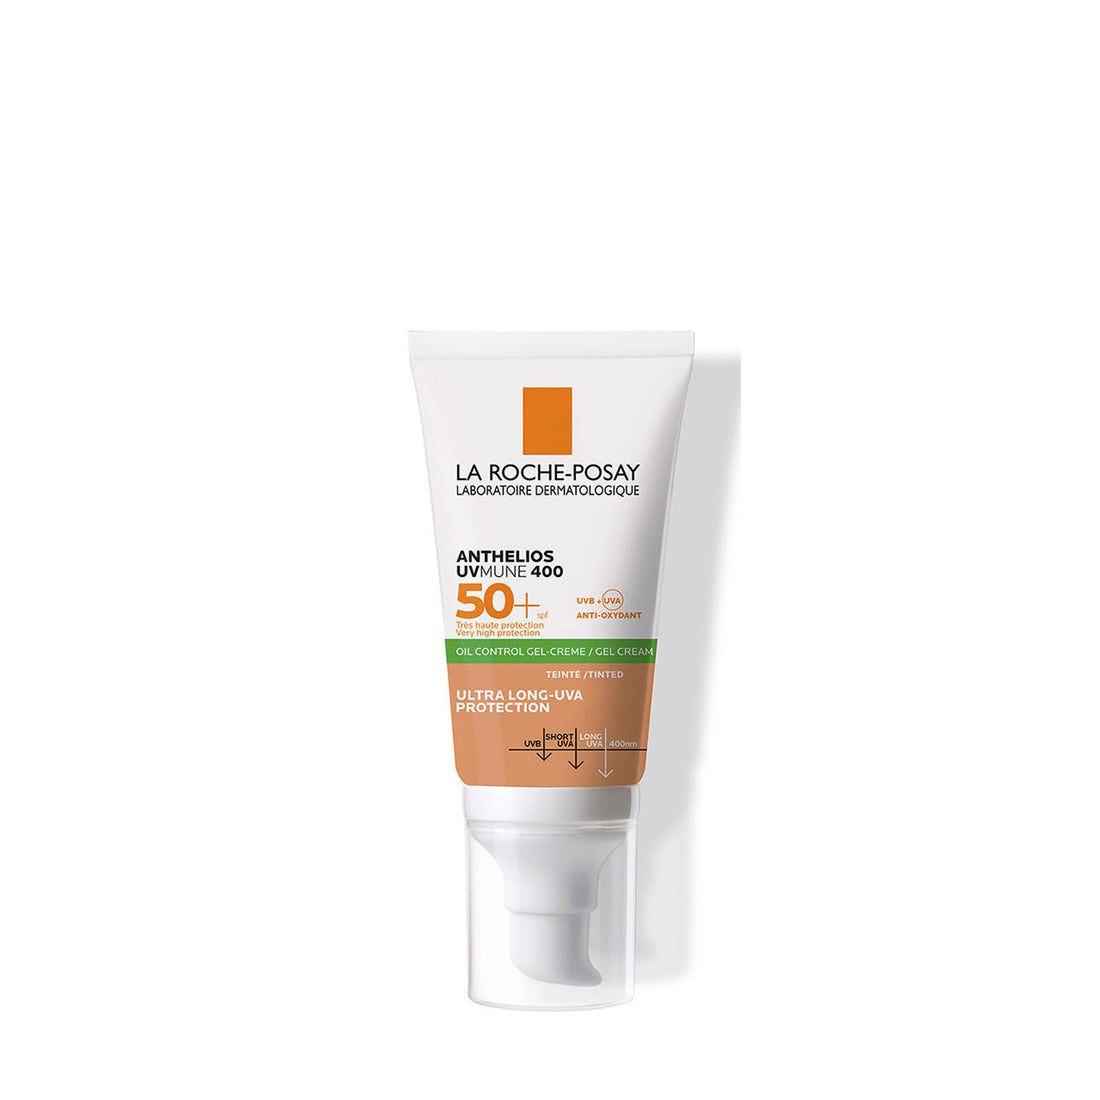 La Roche-Posay Anthelios XL SPF50+ Tinted Dry Touch Gel-Cream 50ml